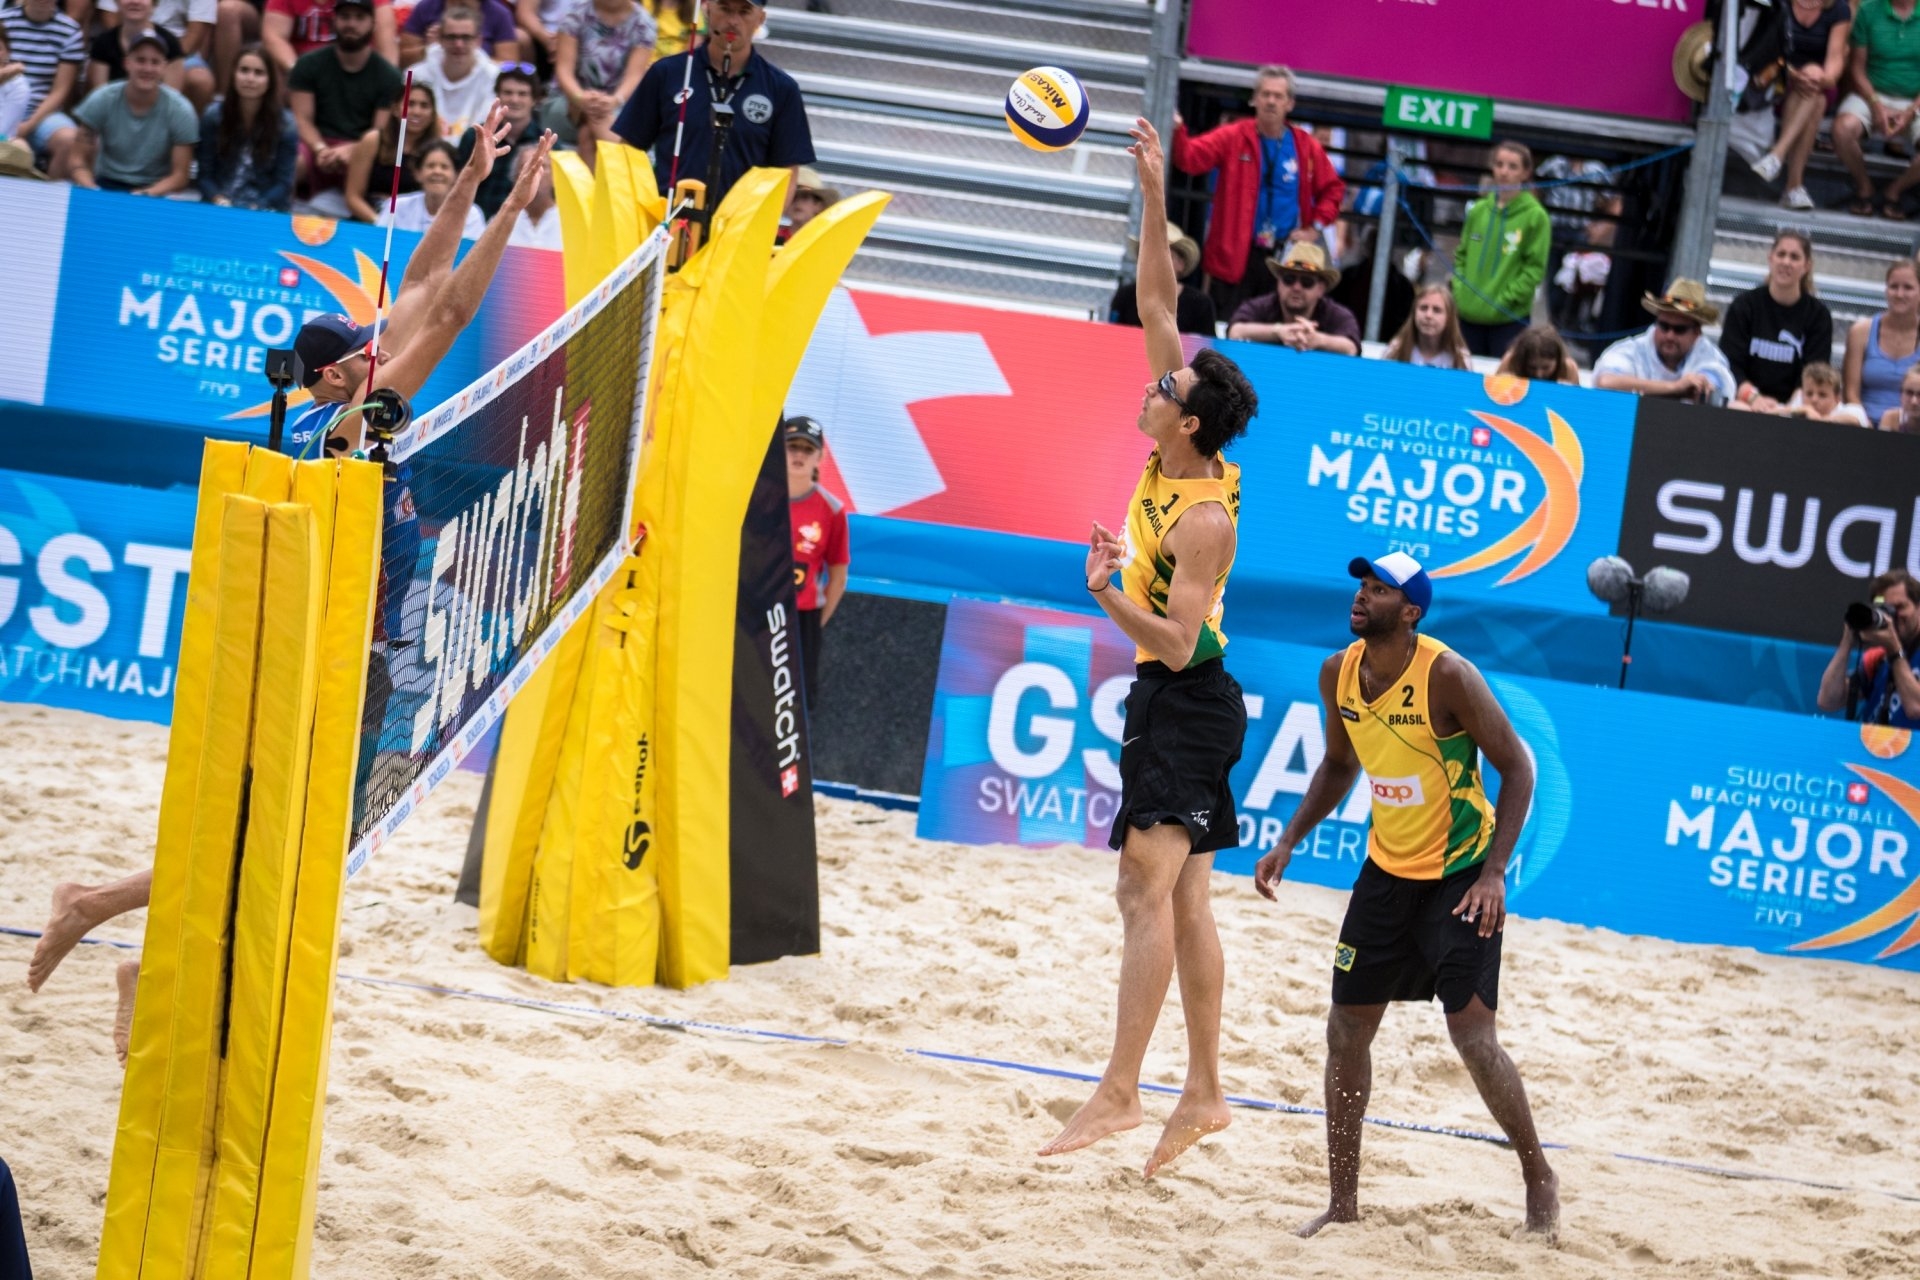 Brazil's Evandro and Andre are looking forward to back-to-back medals in Fort Lauderdale